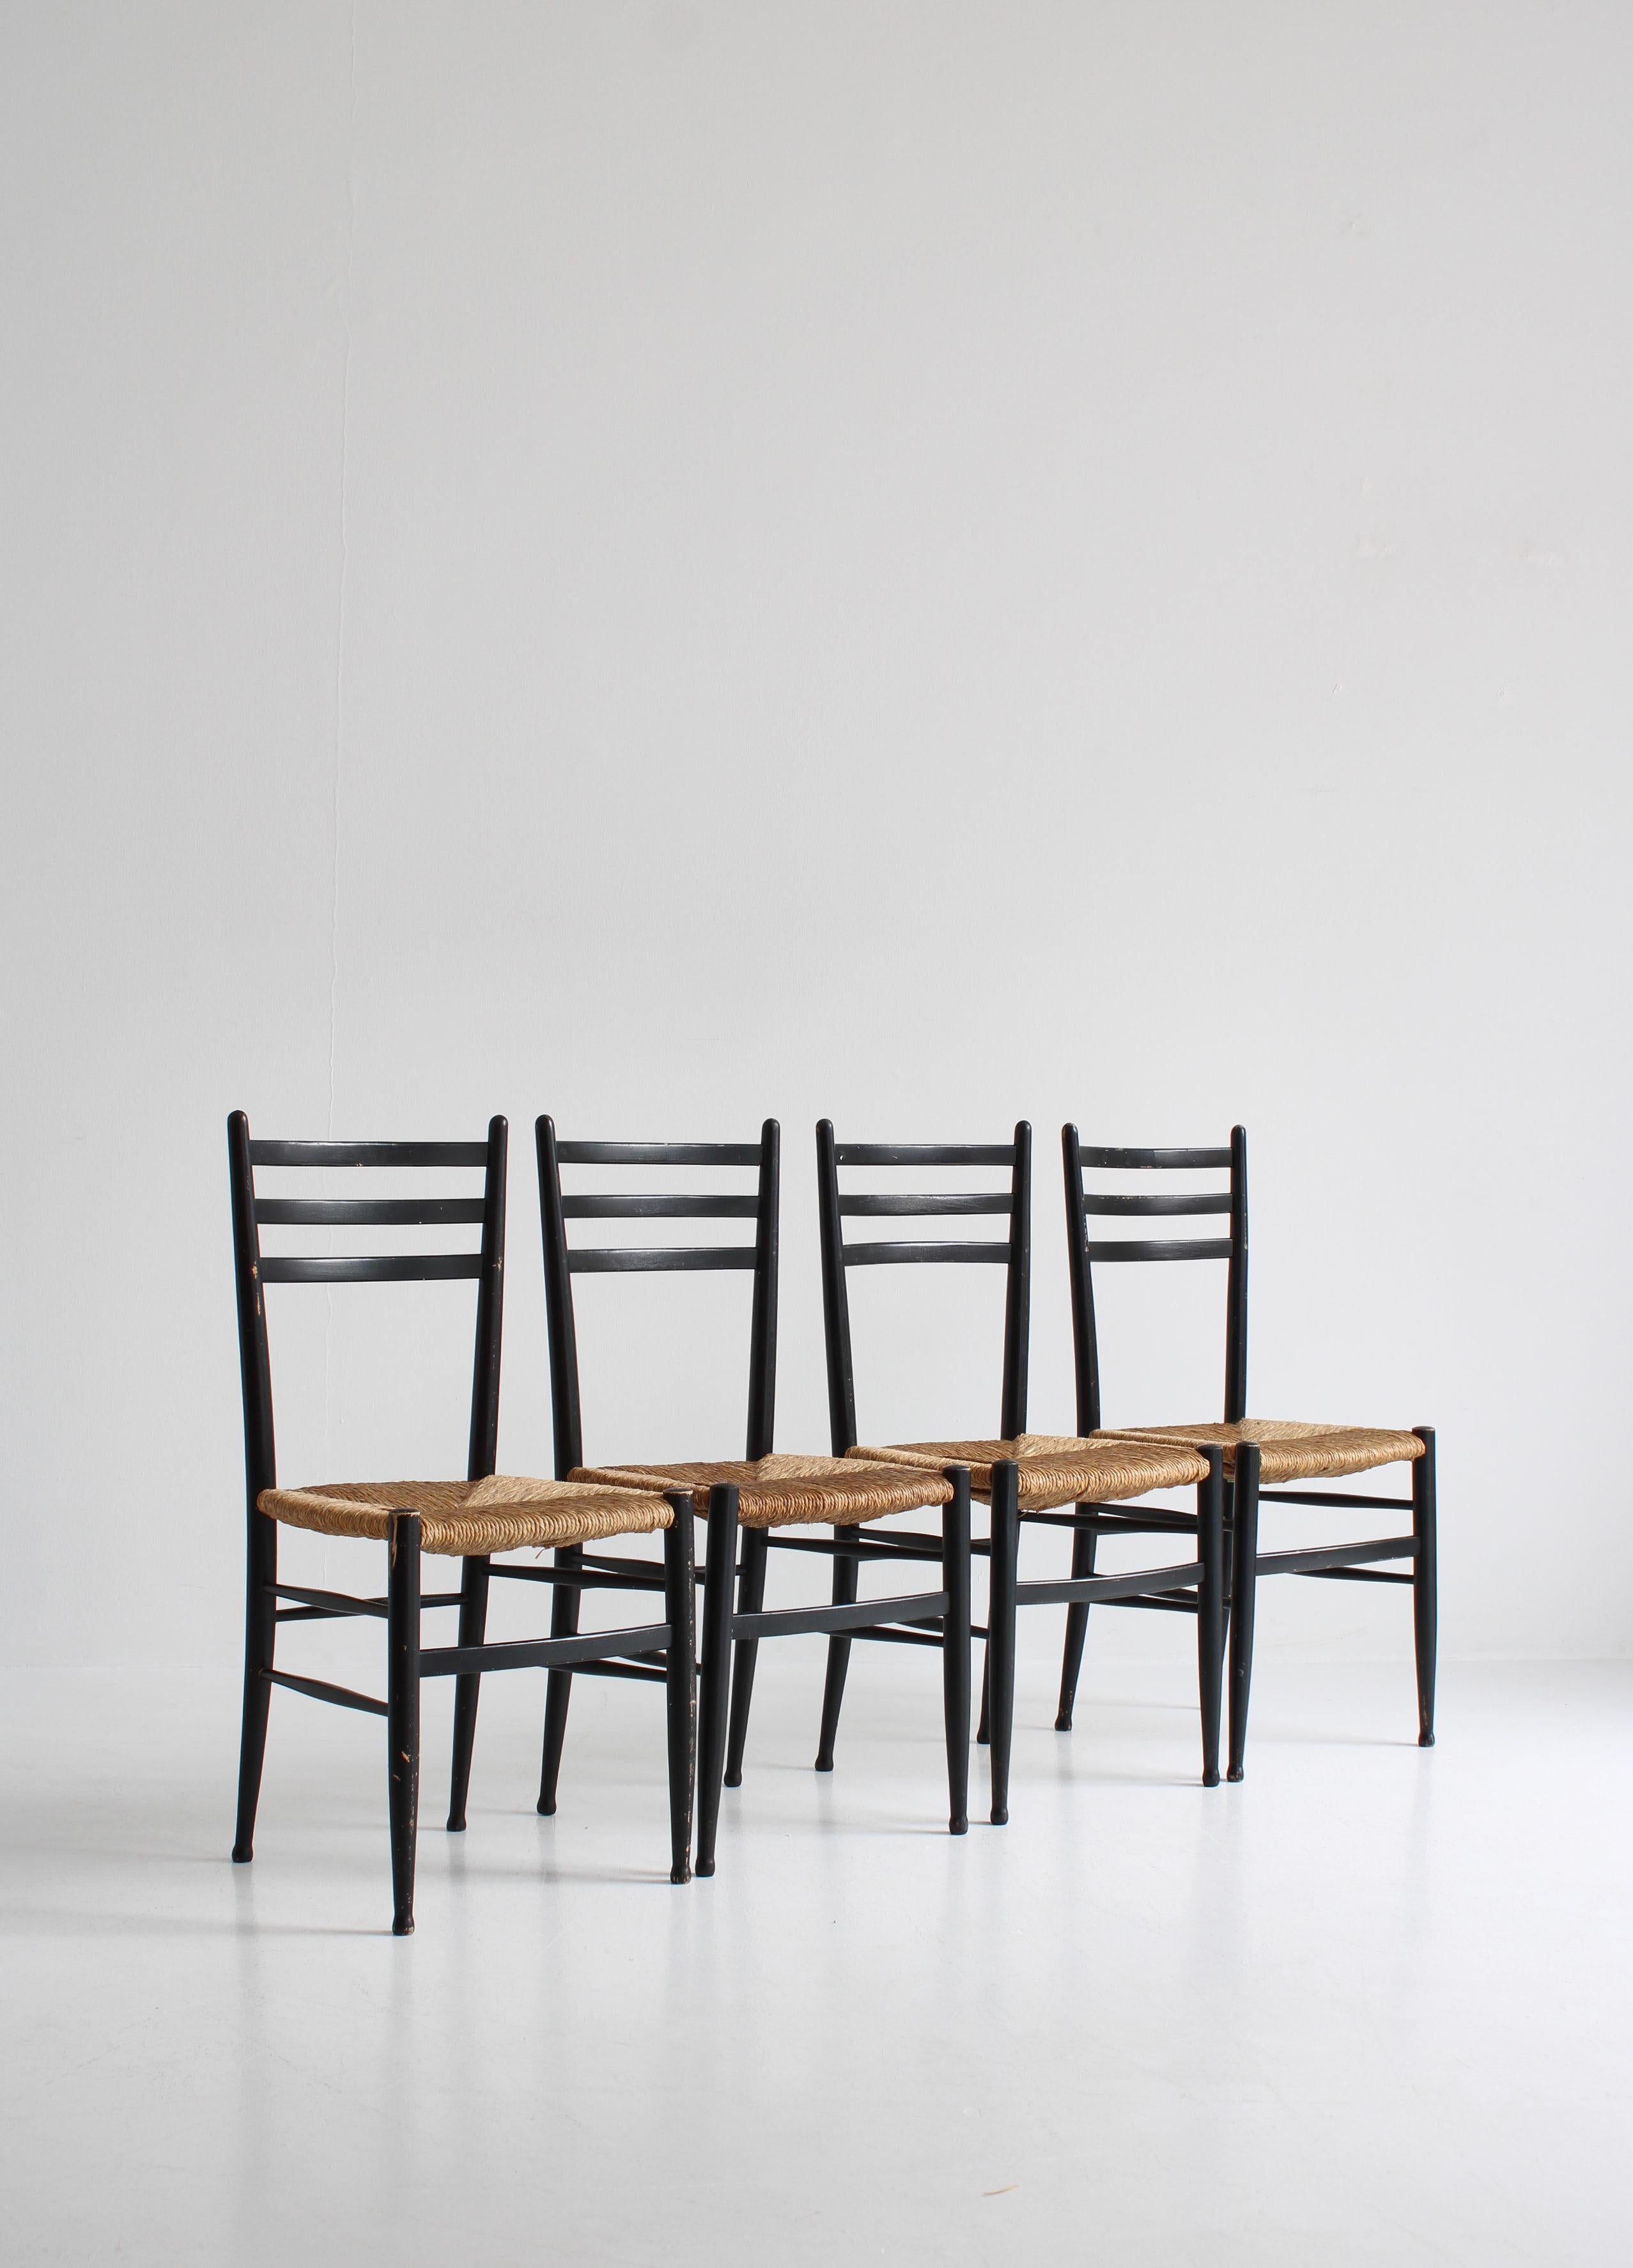 Wonderful set of 4 original vintage dining chairs made in Italy in the 1960s by Gessef. The chairs are in fair unrestored condition and still retains the original black lacquer and the rustique seats in thick hand woven seagrass. The style is